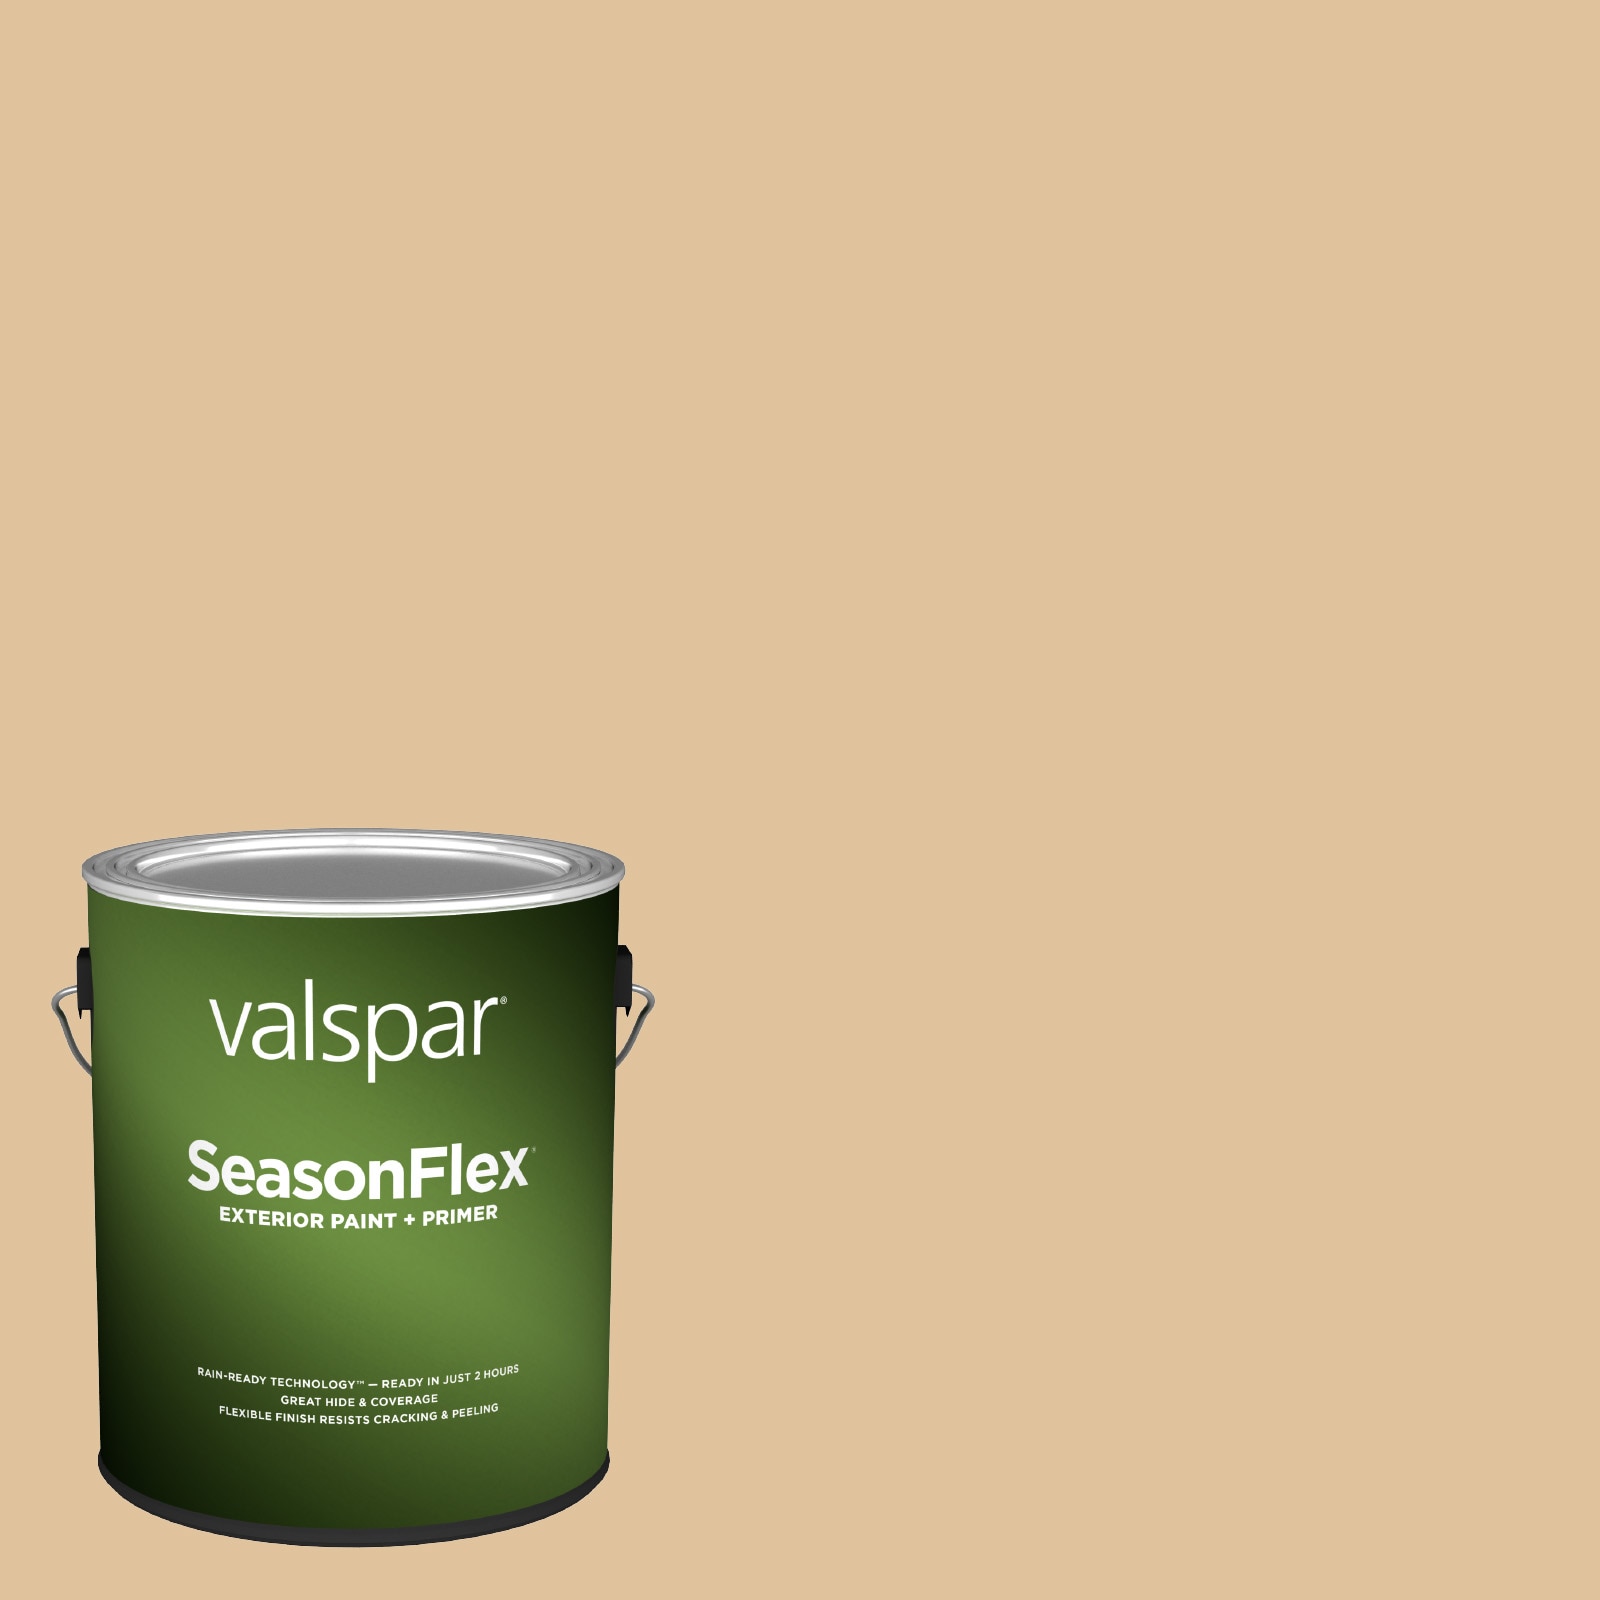 Valspar 1006-8C Barely Pink Precisely Matched For Paint and Spray Paint